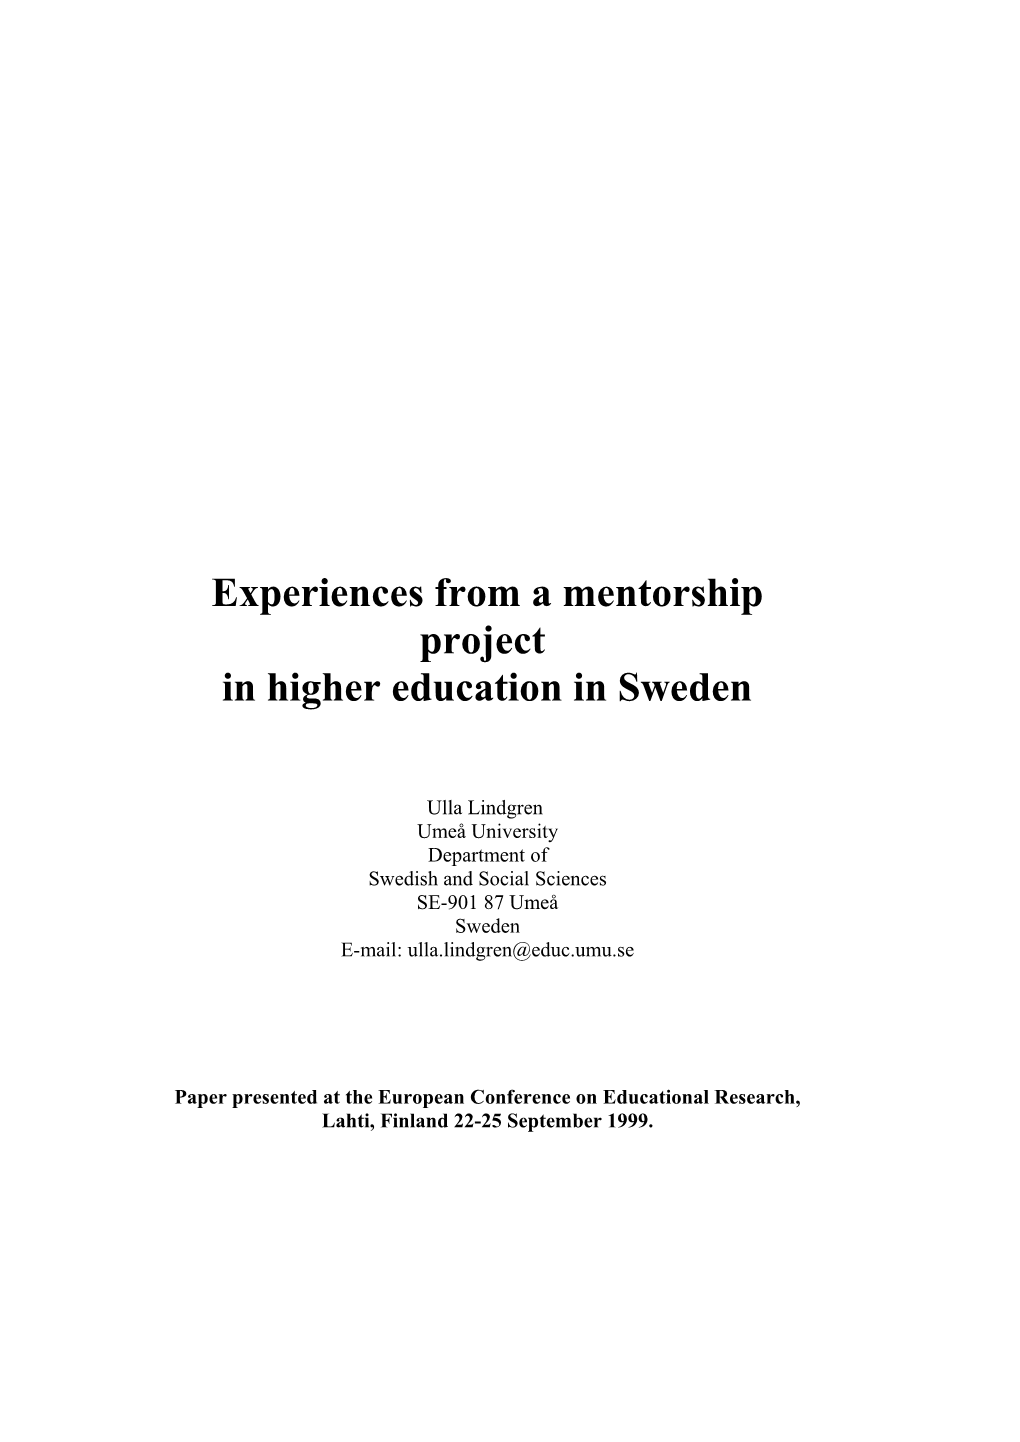 Experiences from a Mentorship Project in Higher Education in Sweden